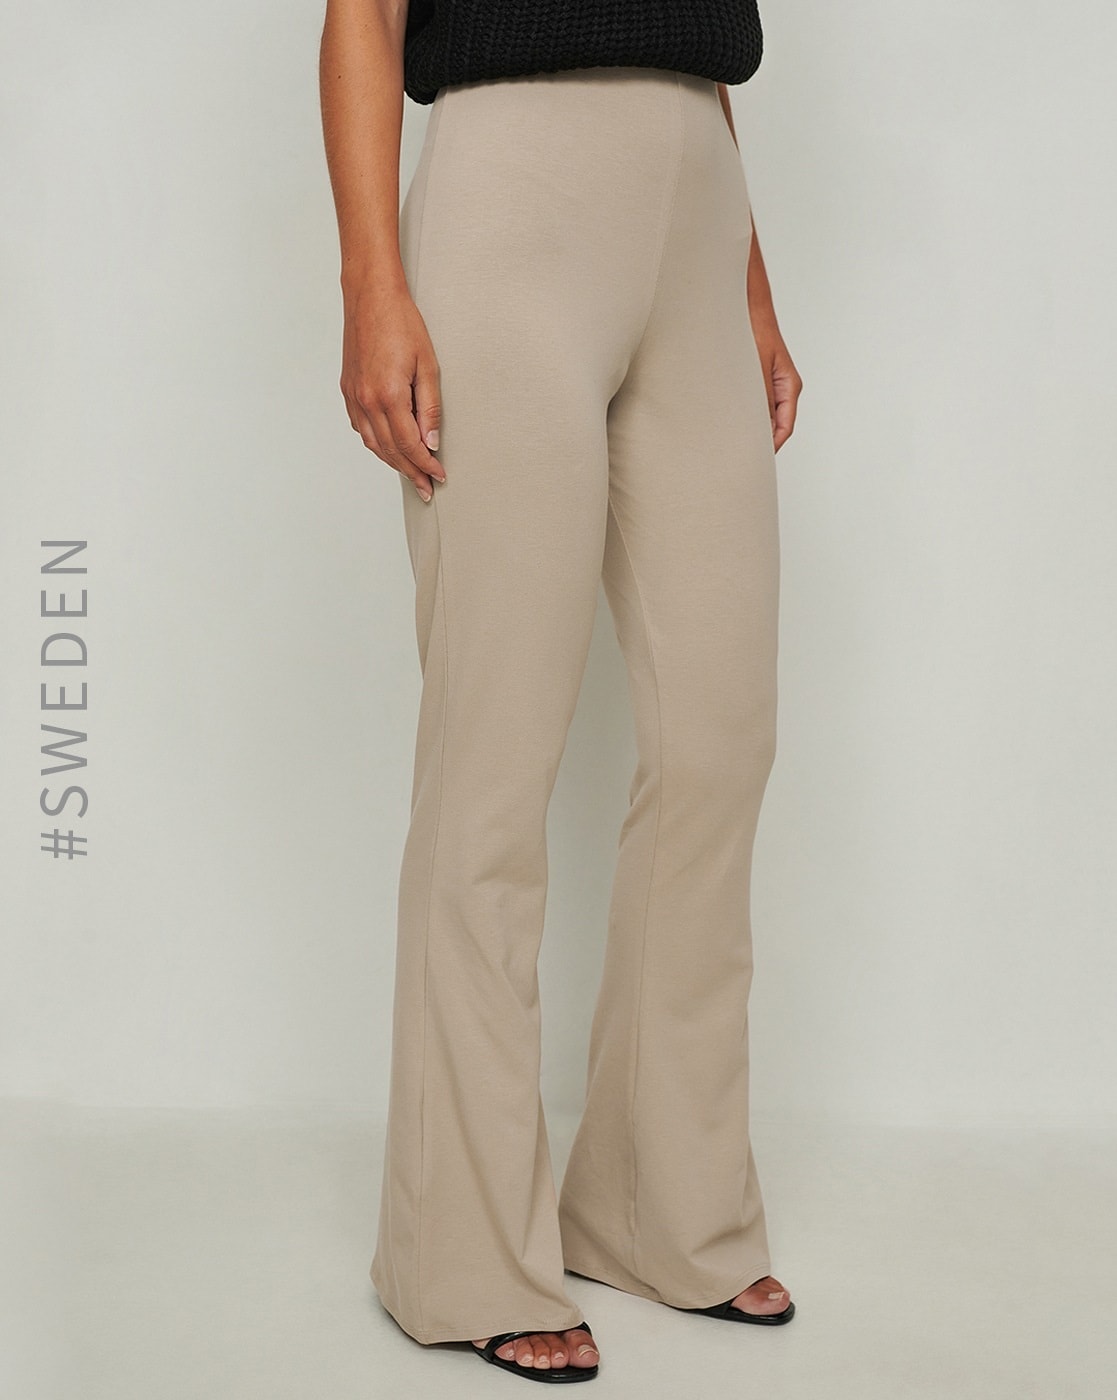 Buy Beige Trousers  Pants for Women by AND Online  Ajiocom